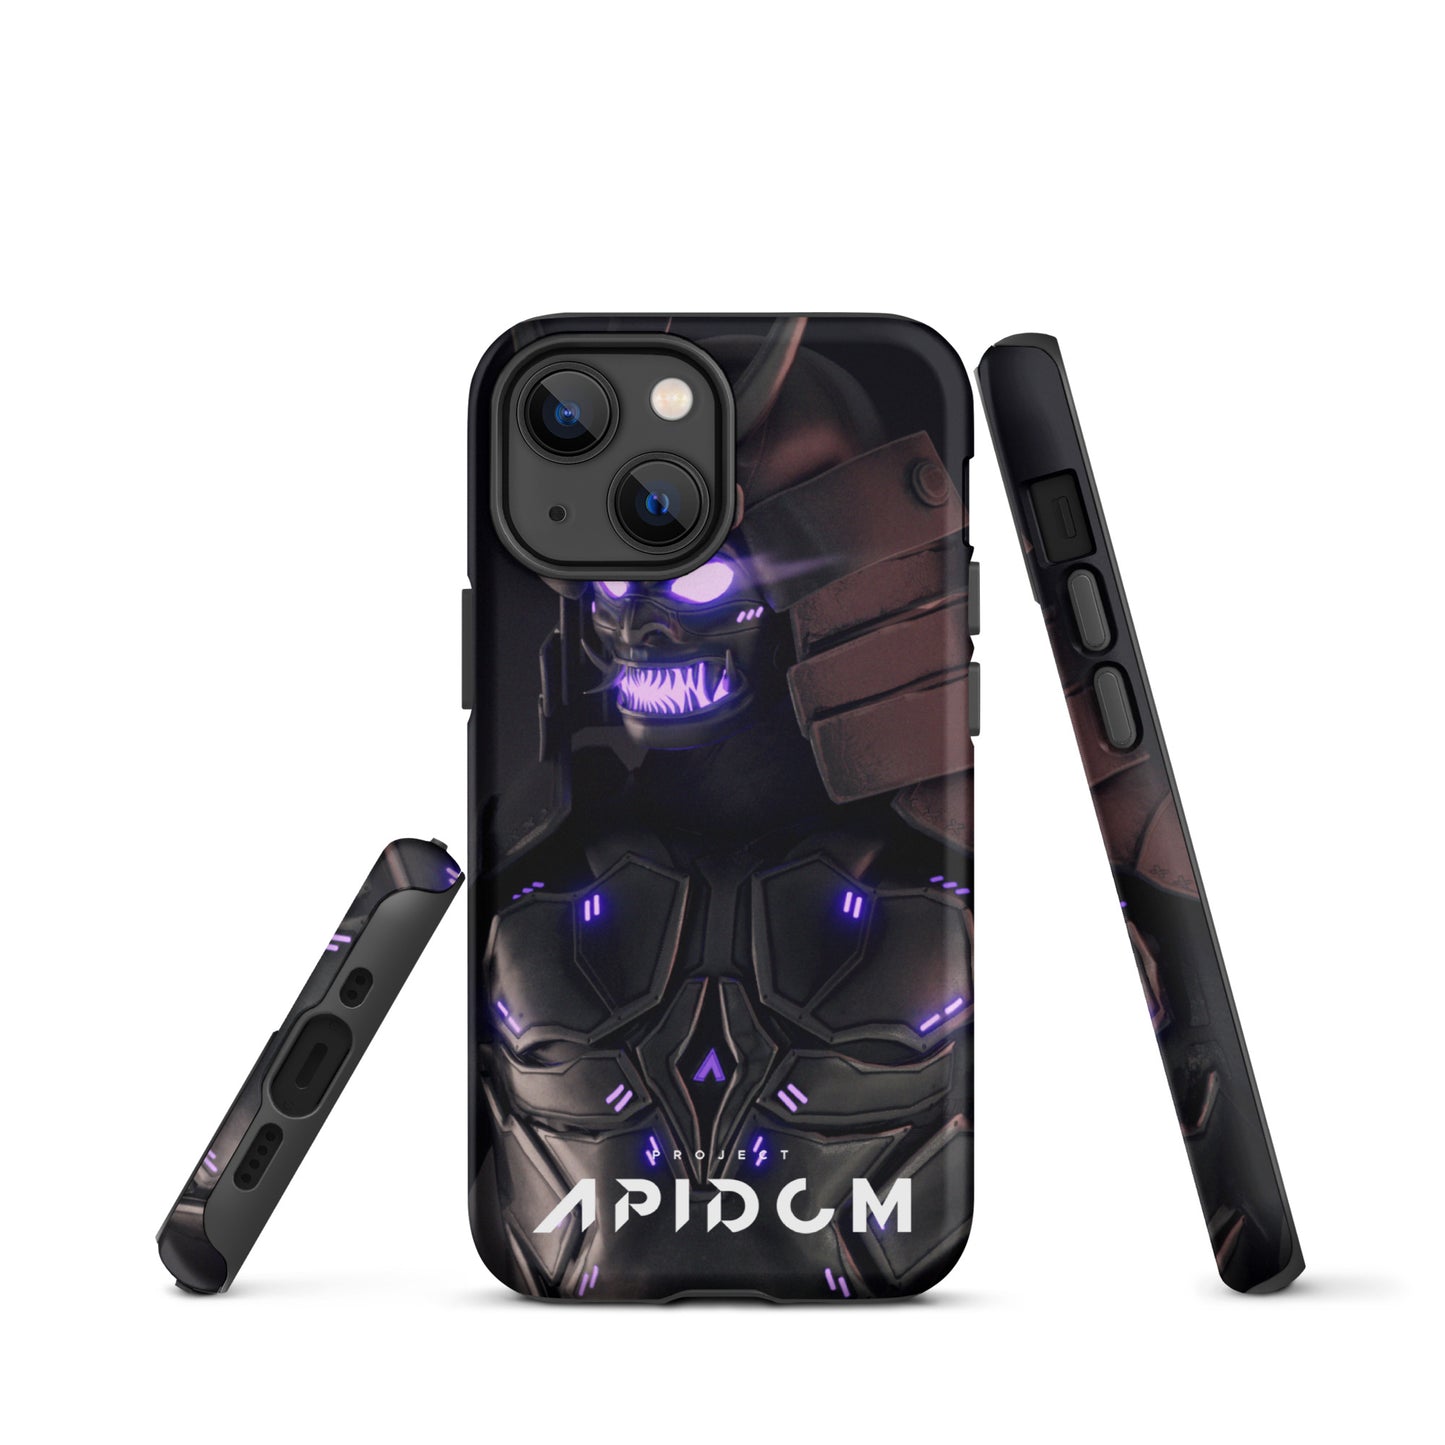 Project Apidom - Tough Case for iPhone®